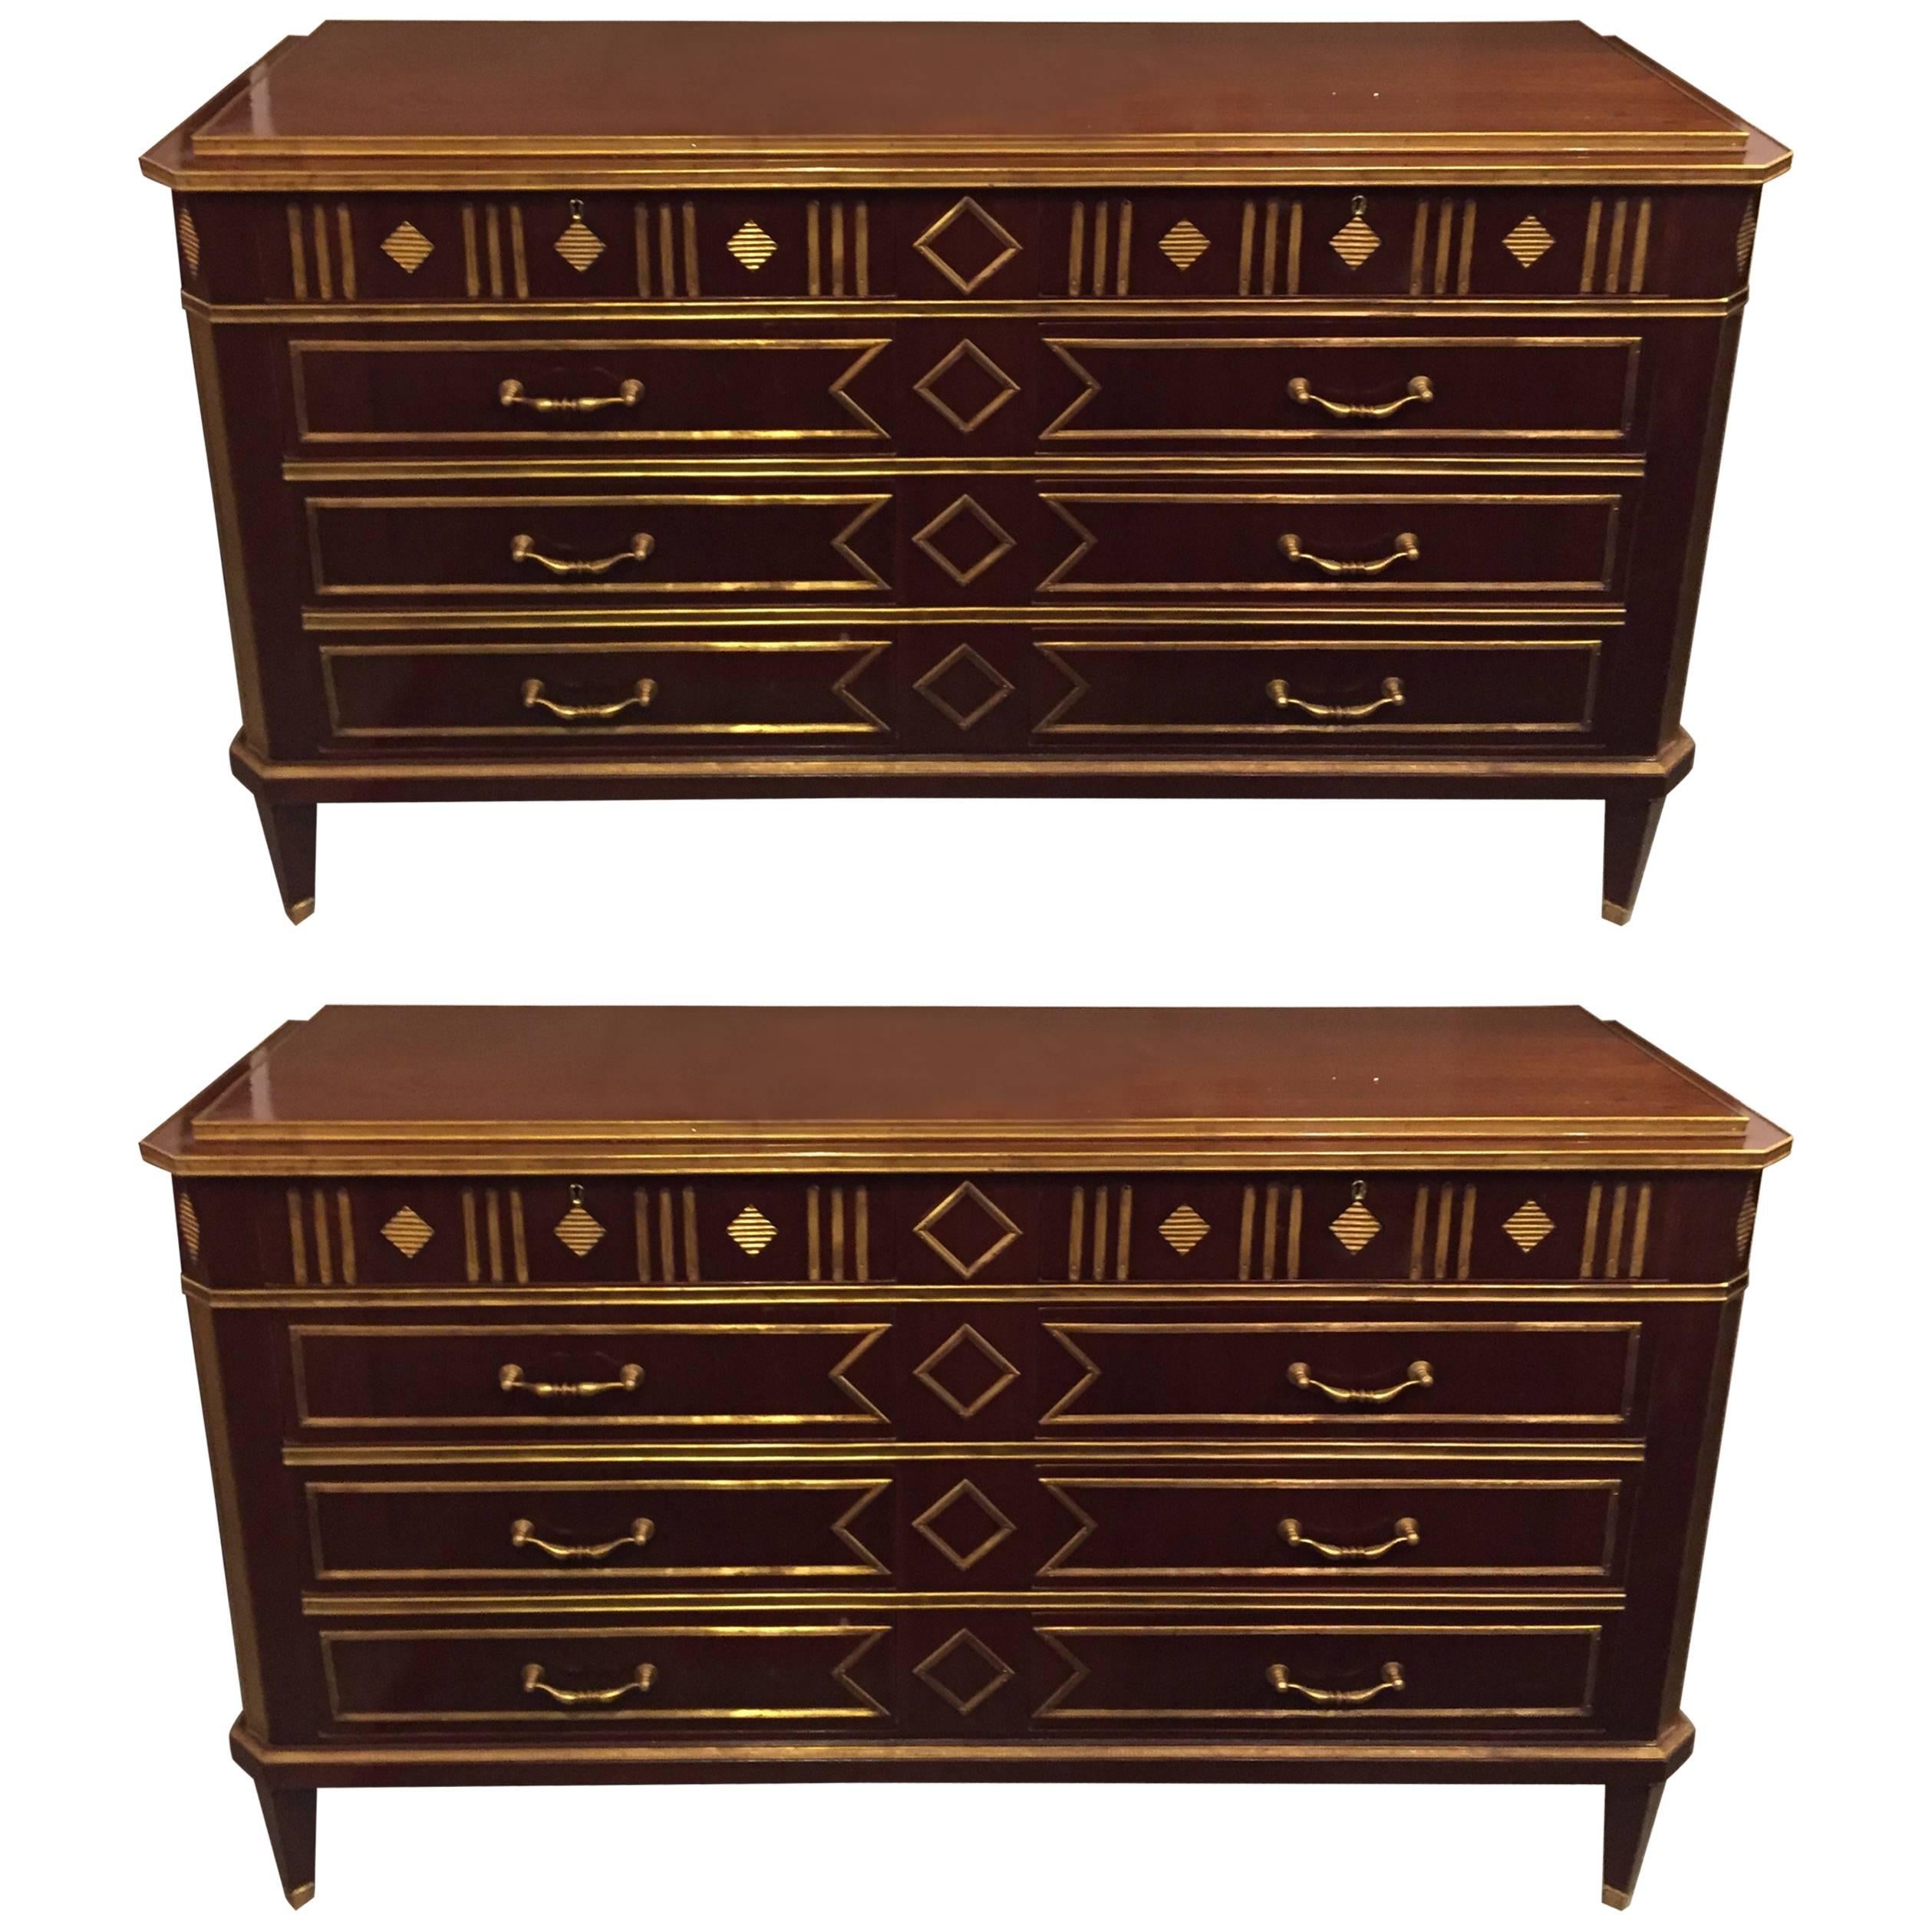 Pair of Russian Neoclassical Style Chests or Commodes with Step Up Tops